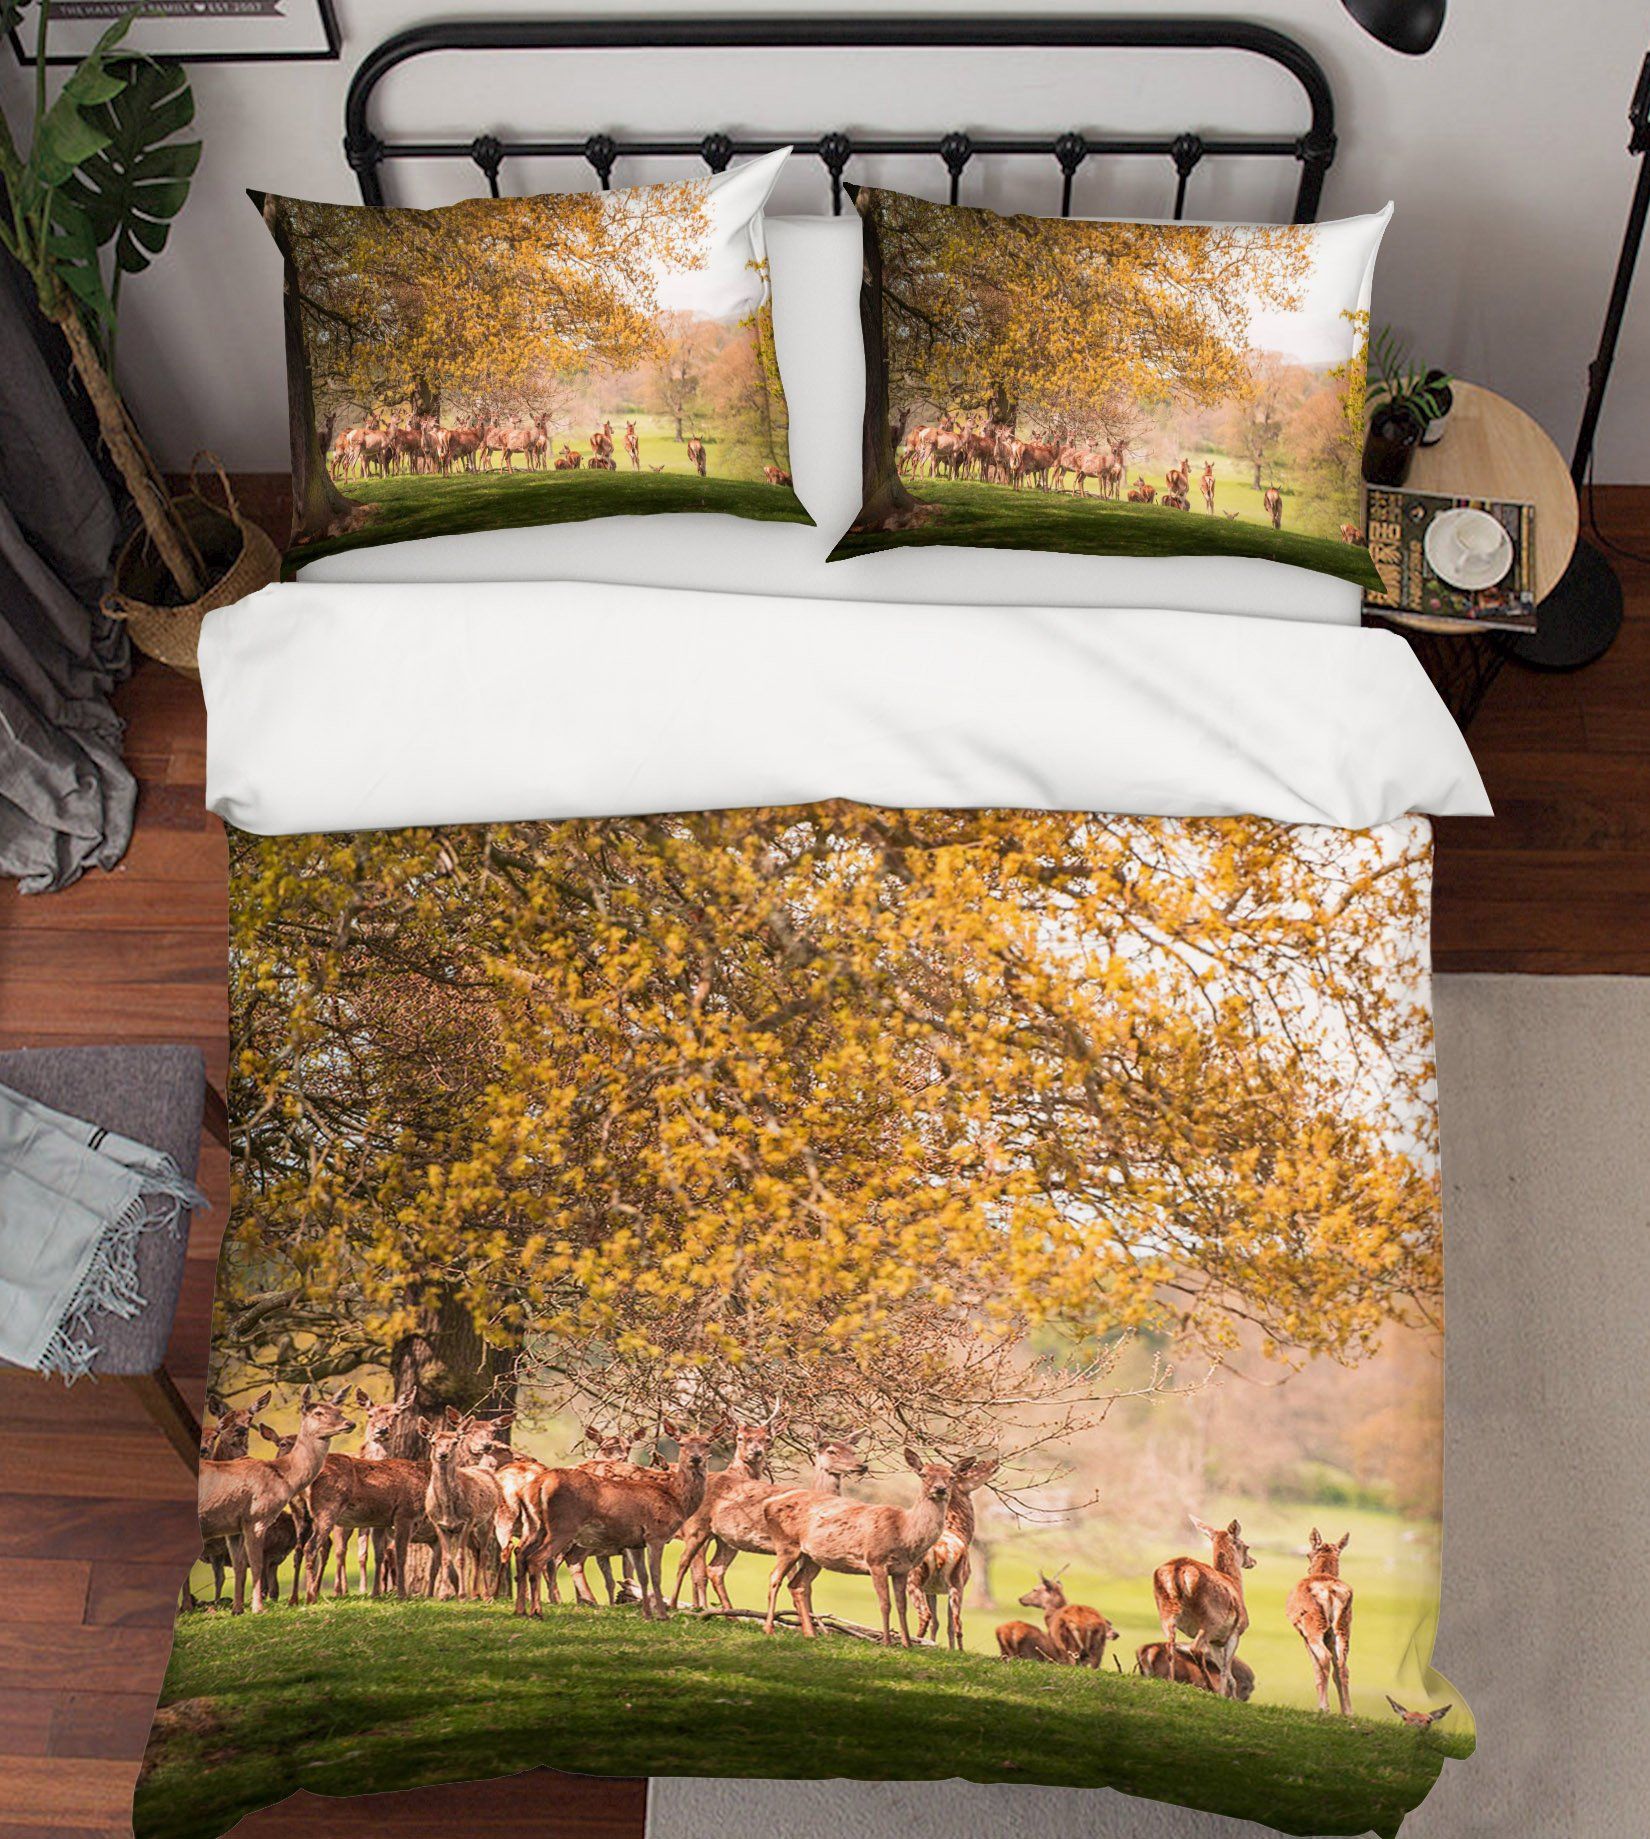 3D Forest Deer 2010 Bed Pillowcases Quilt Quiet Covers AJ Creativity Home 